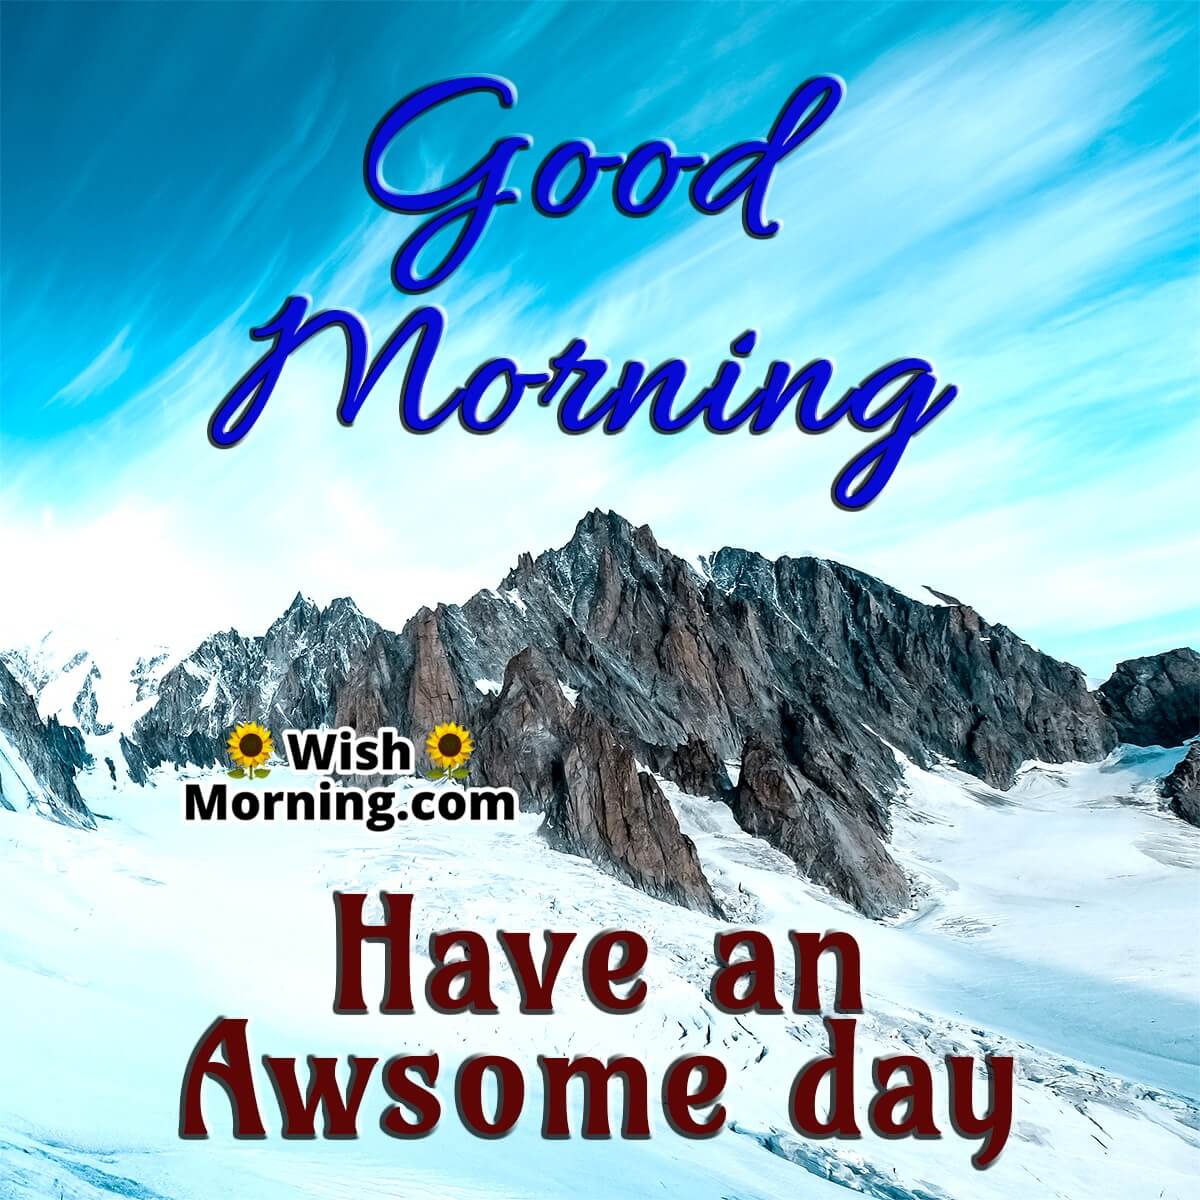 Good Morning Have An Awsome Day